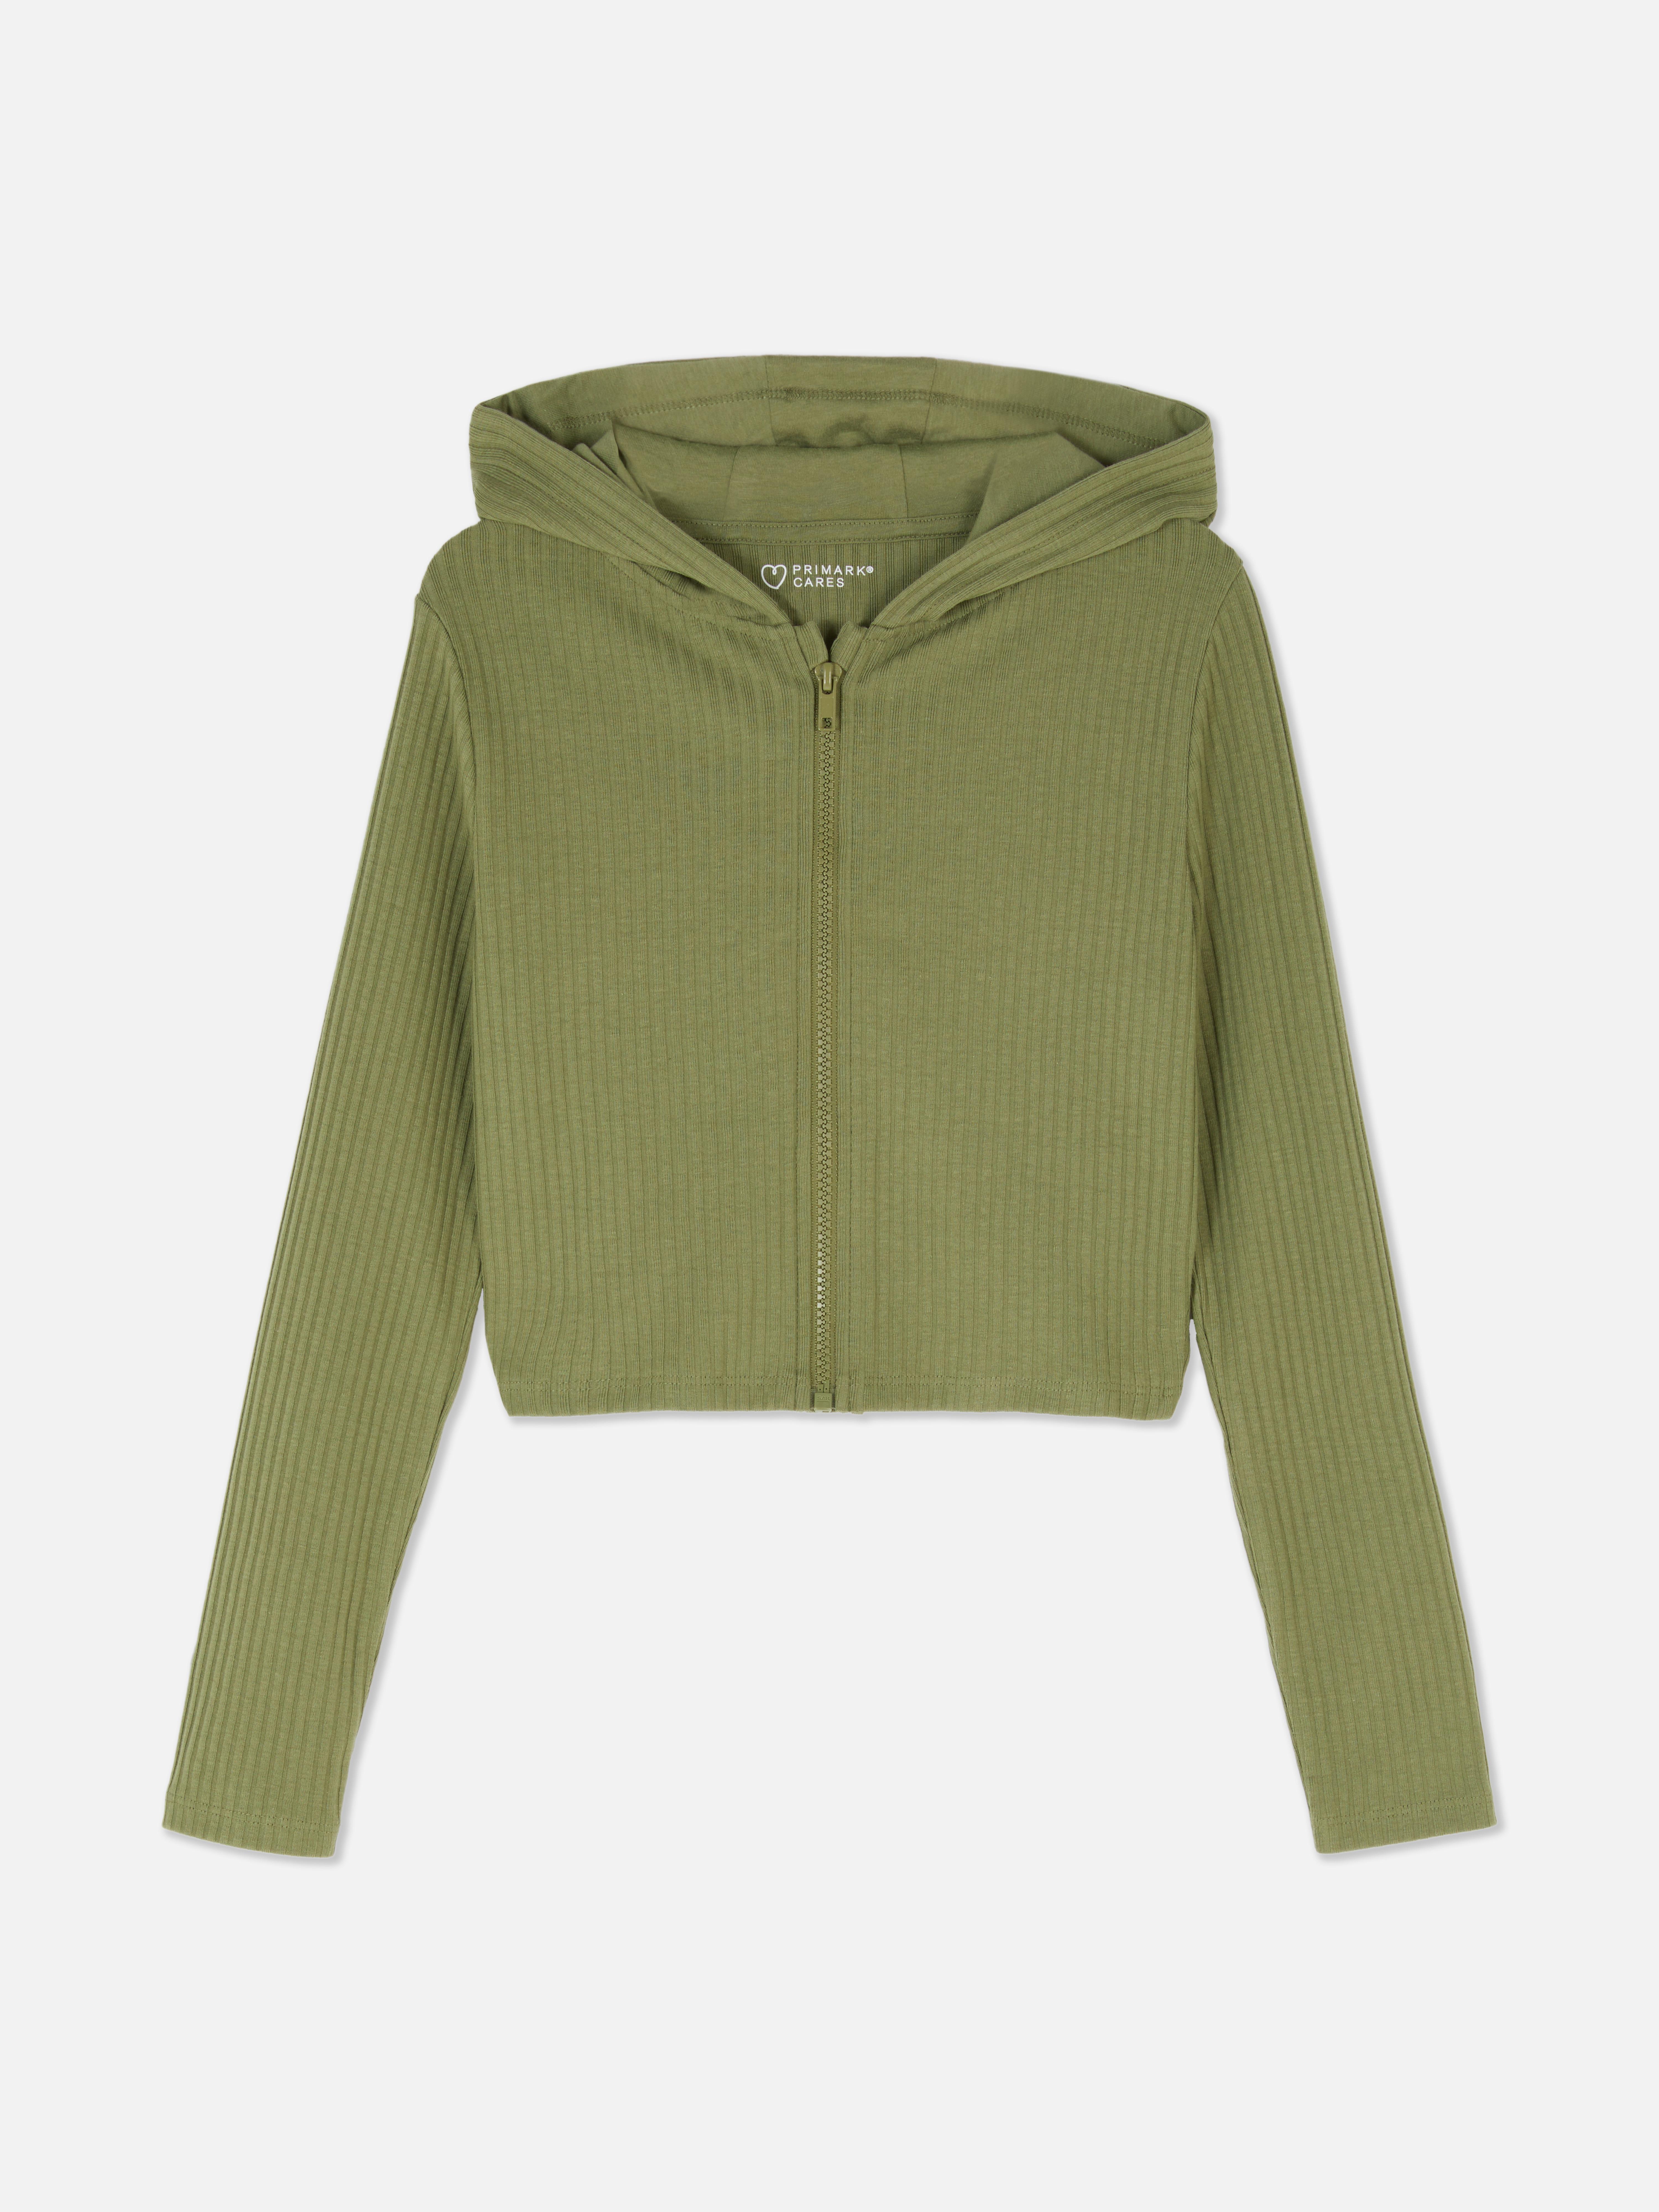 Primark Olive Green NYC Thermal for Girls